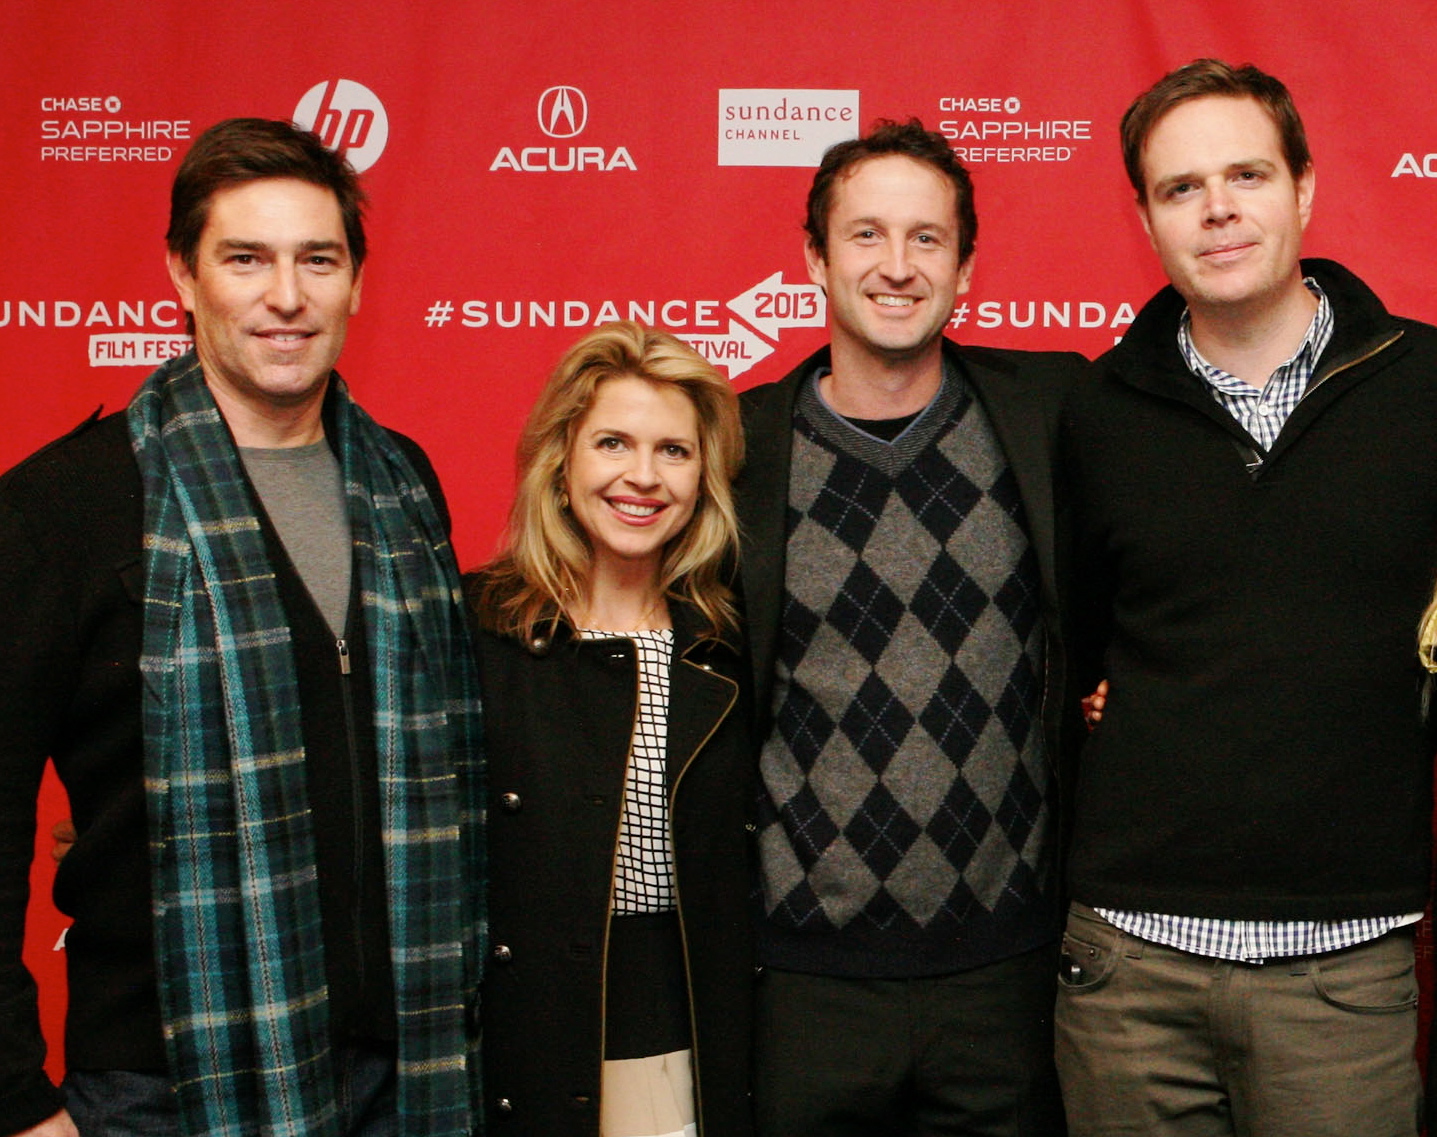 PARK CITY, UT - JANUARY 18, 2013 Actors Roy Abramsohn and Elena Schuber, Sundance Film Festival director of programming Trevor Groth, director Randy Moore attend 'Escape From Tomorrow' Premiere during the 2013 Sundance Film Festival at Prospector Square.